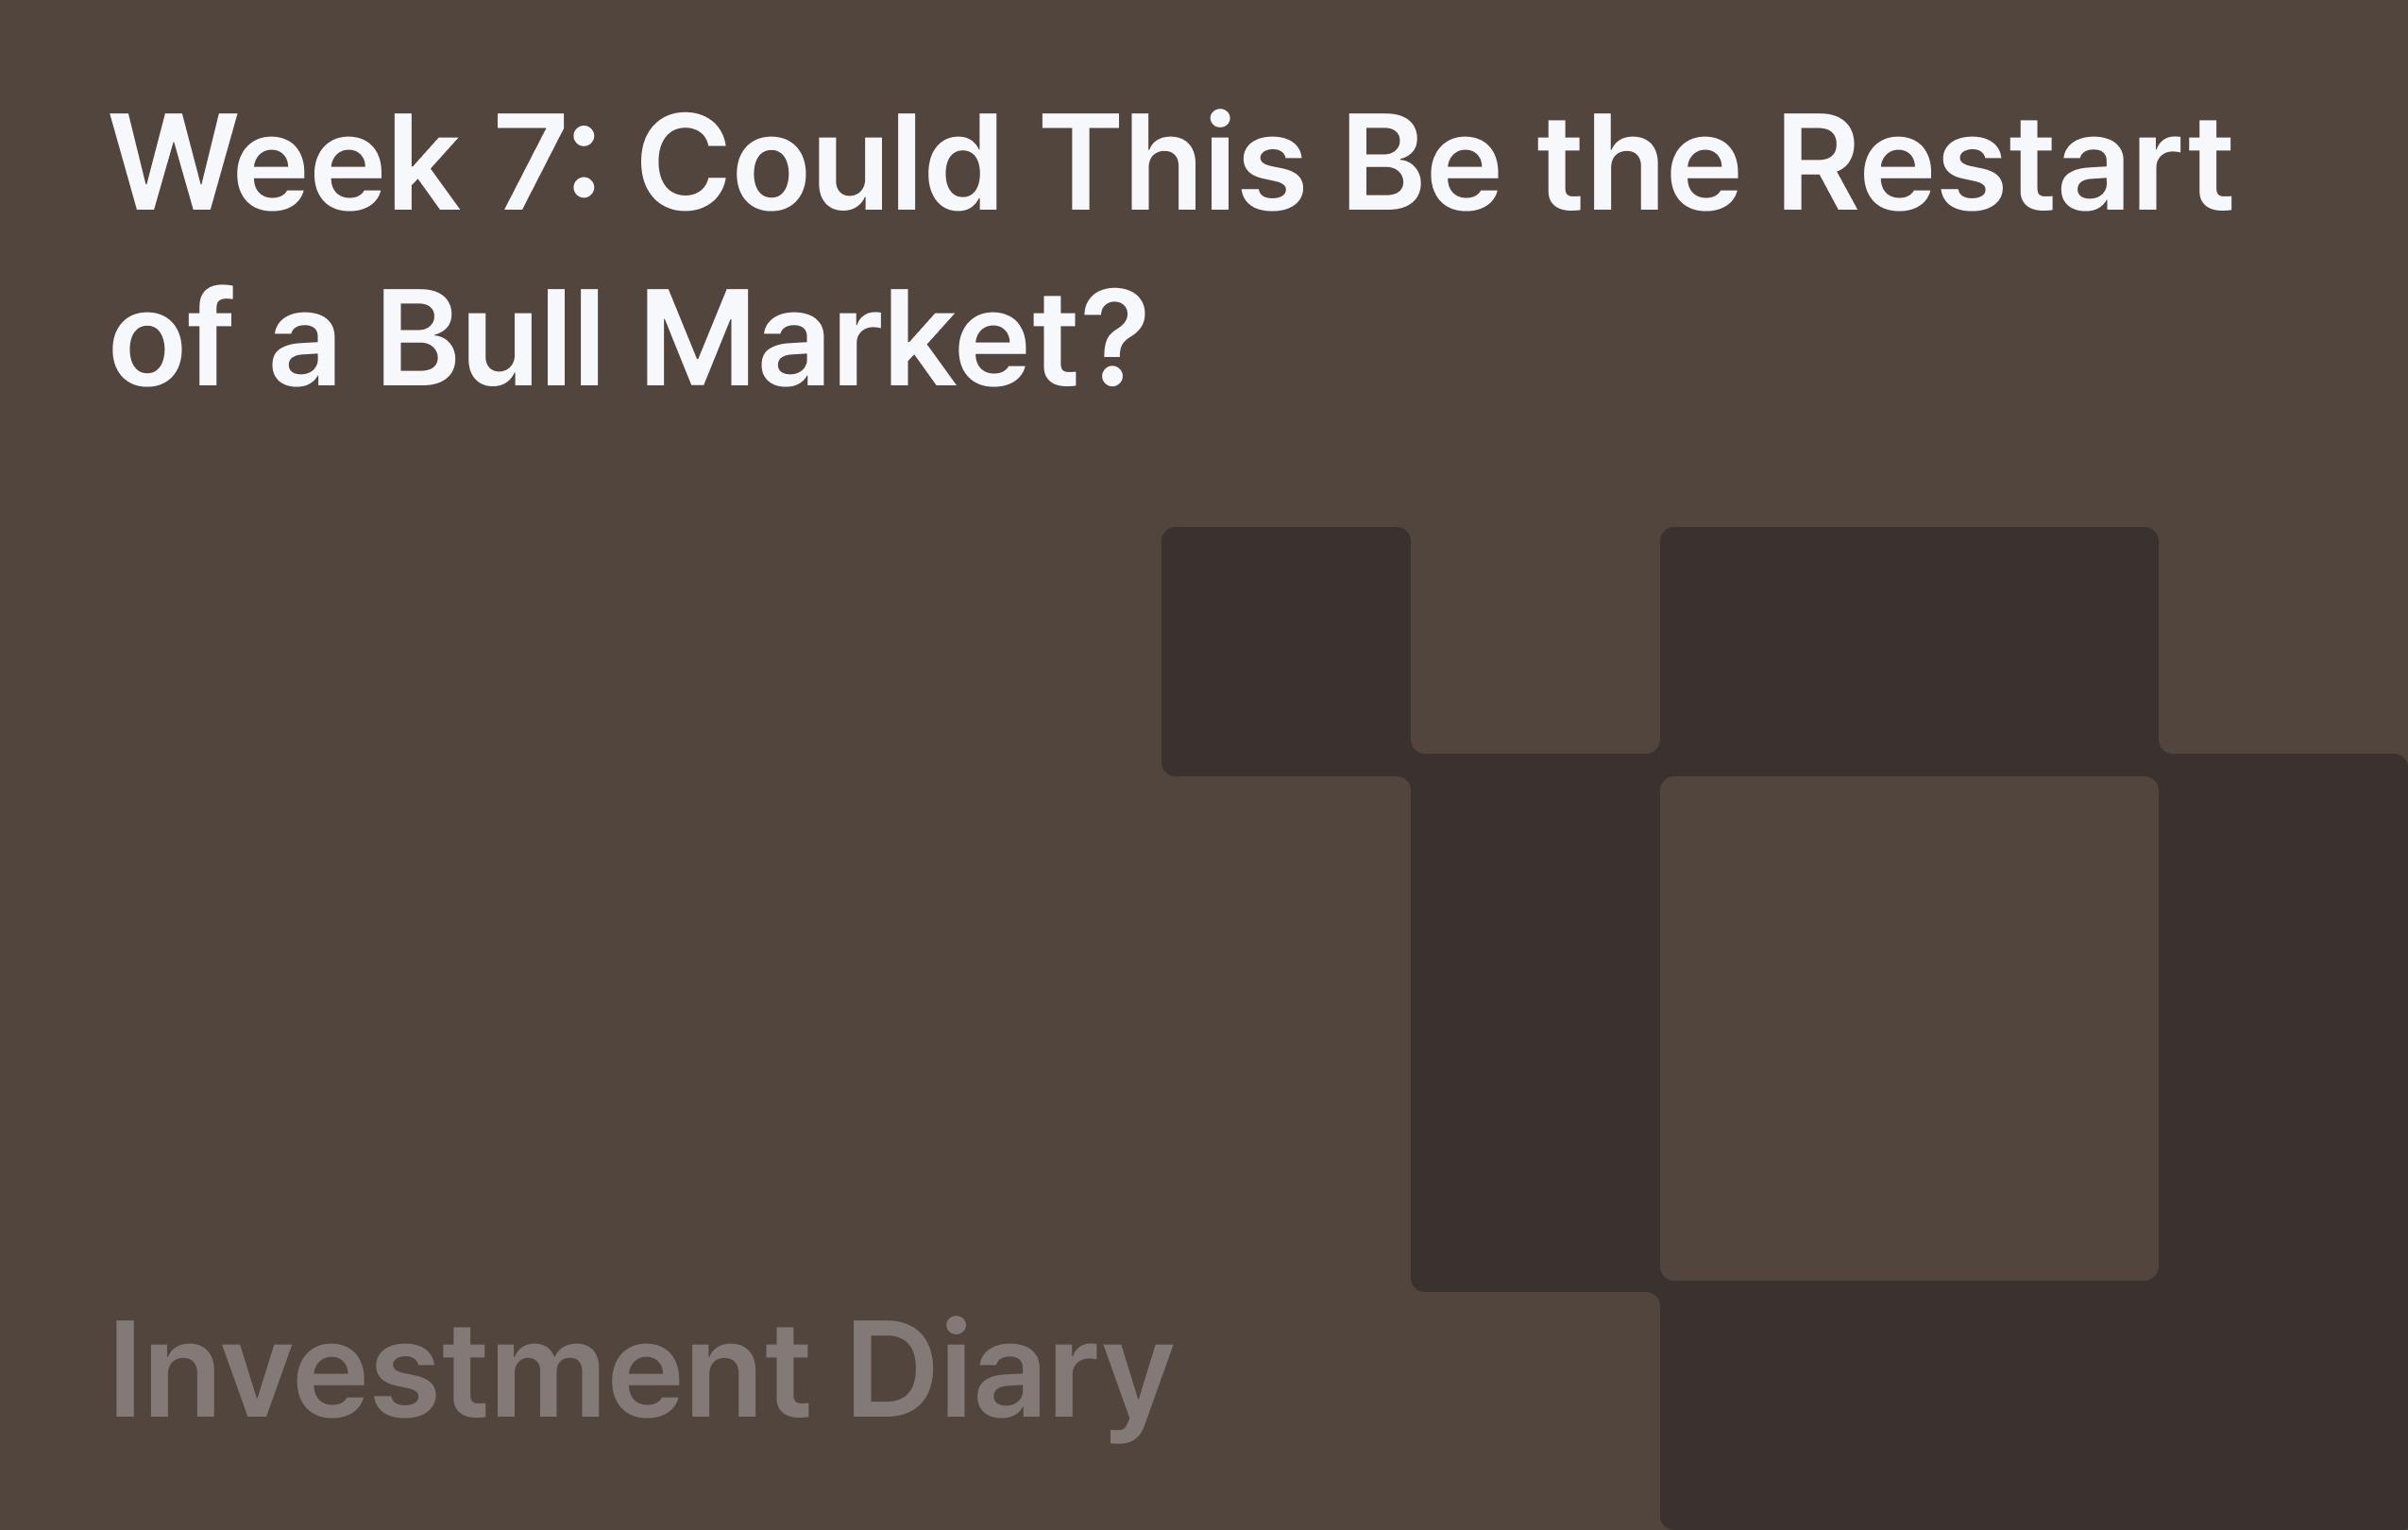 Week 7: Could This Be the Restart of a Bull Market?